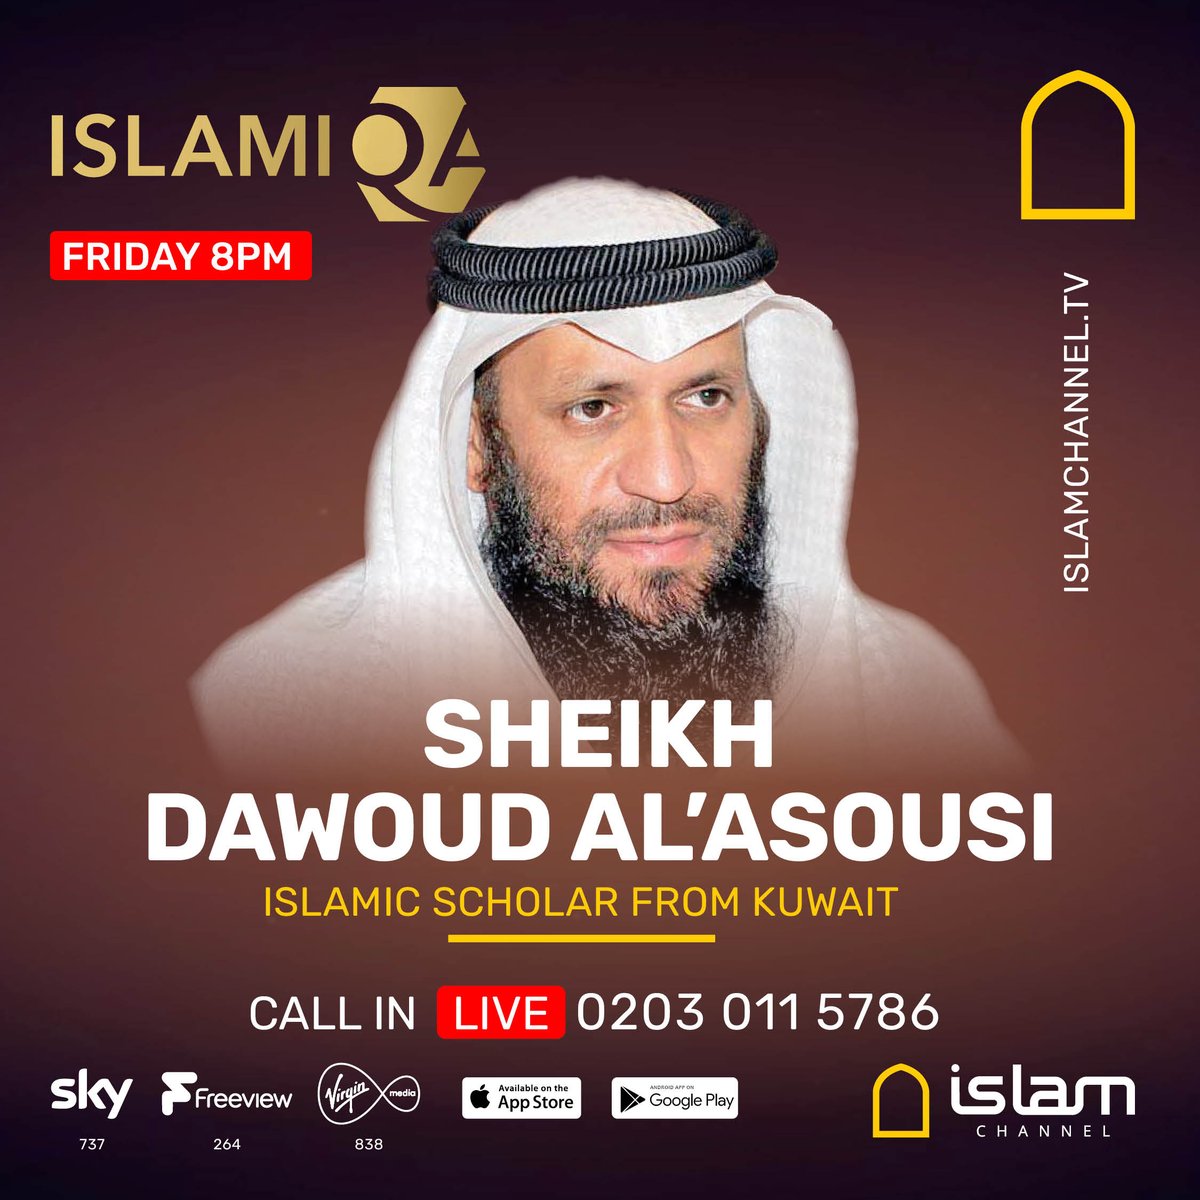 Catch Sheikh Dawoud Al'Asousi tonight on IslamiQA from 8pm (UK) on telly and online. #islamiqa #islam #muslims #deen #questions